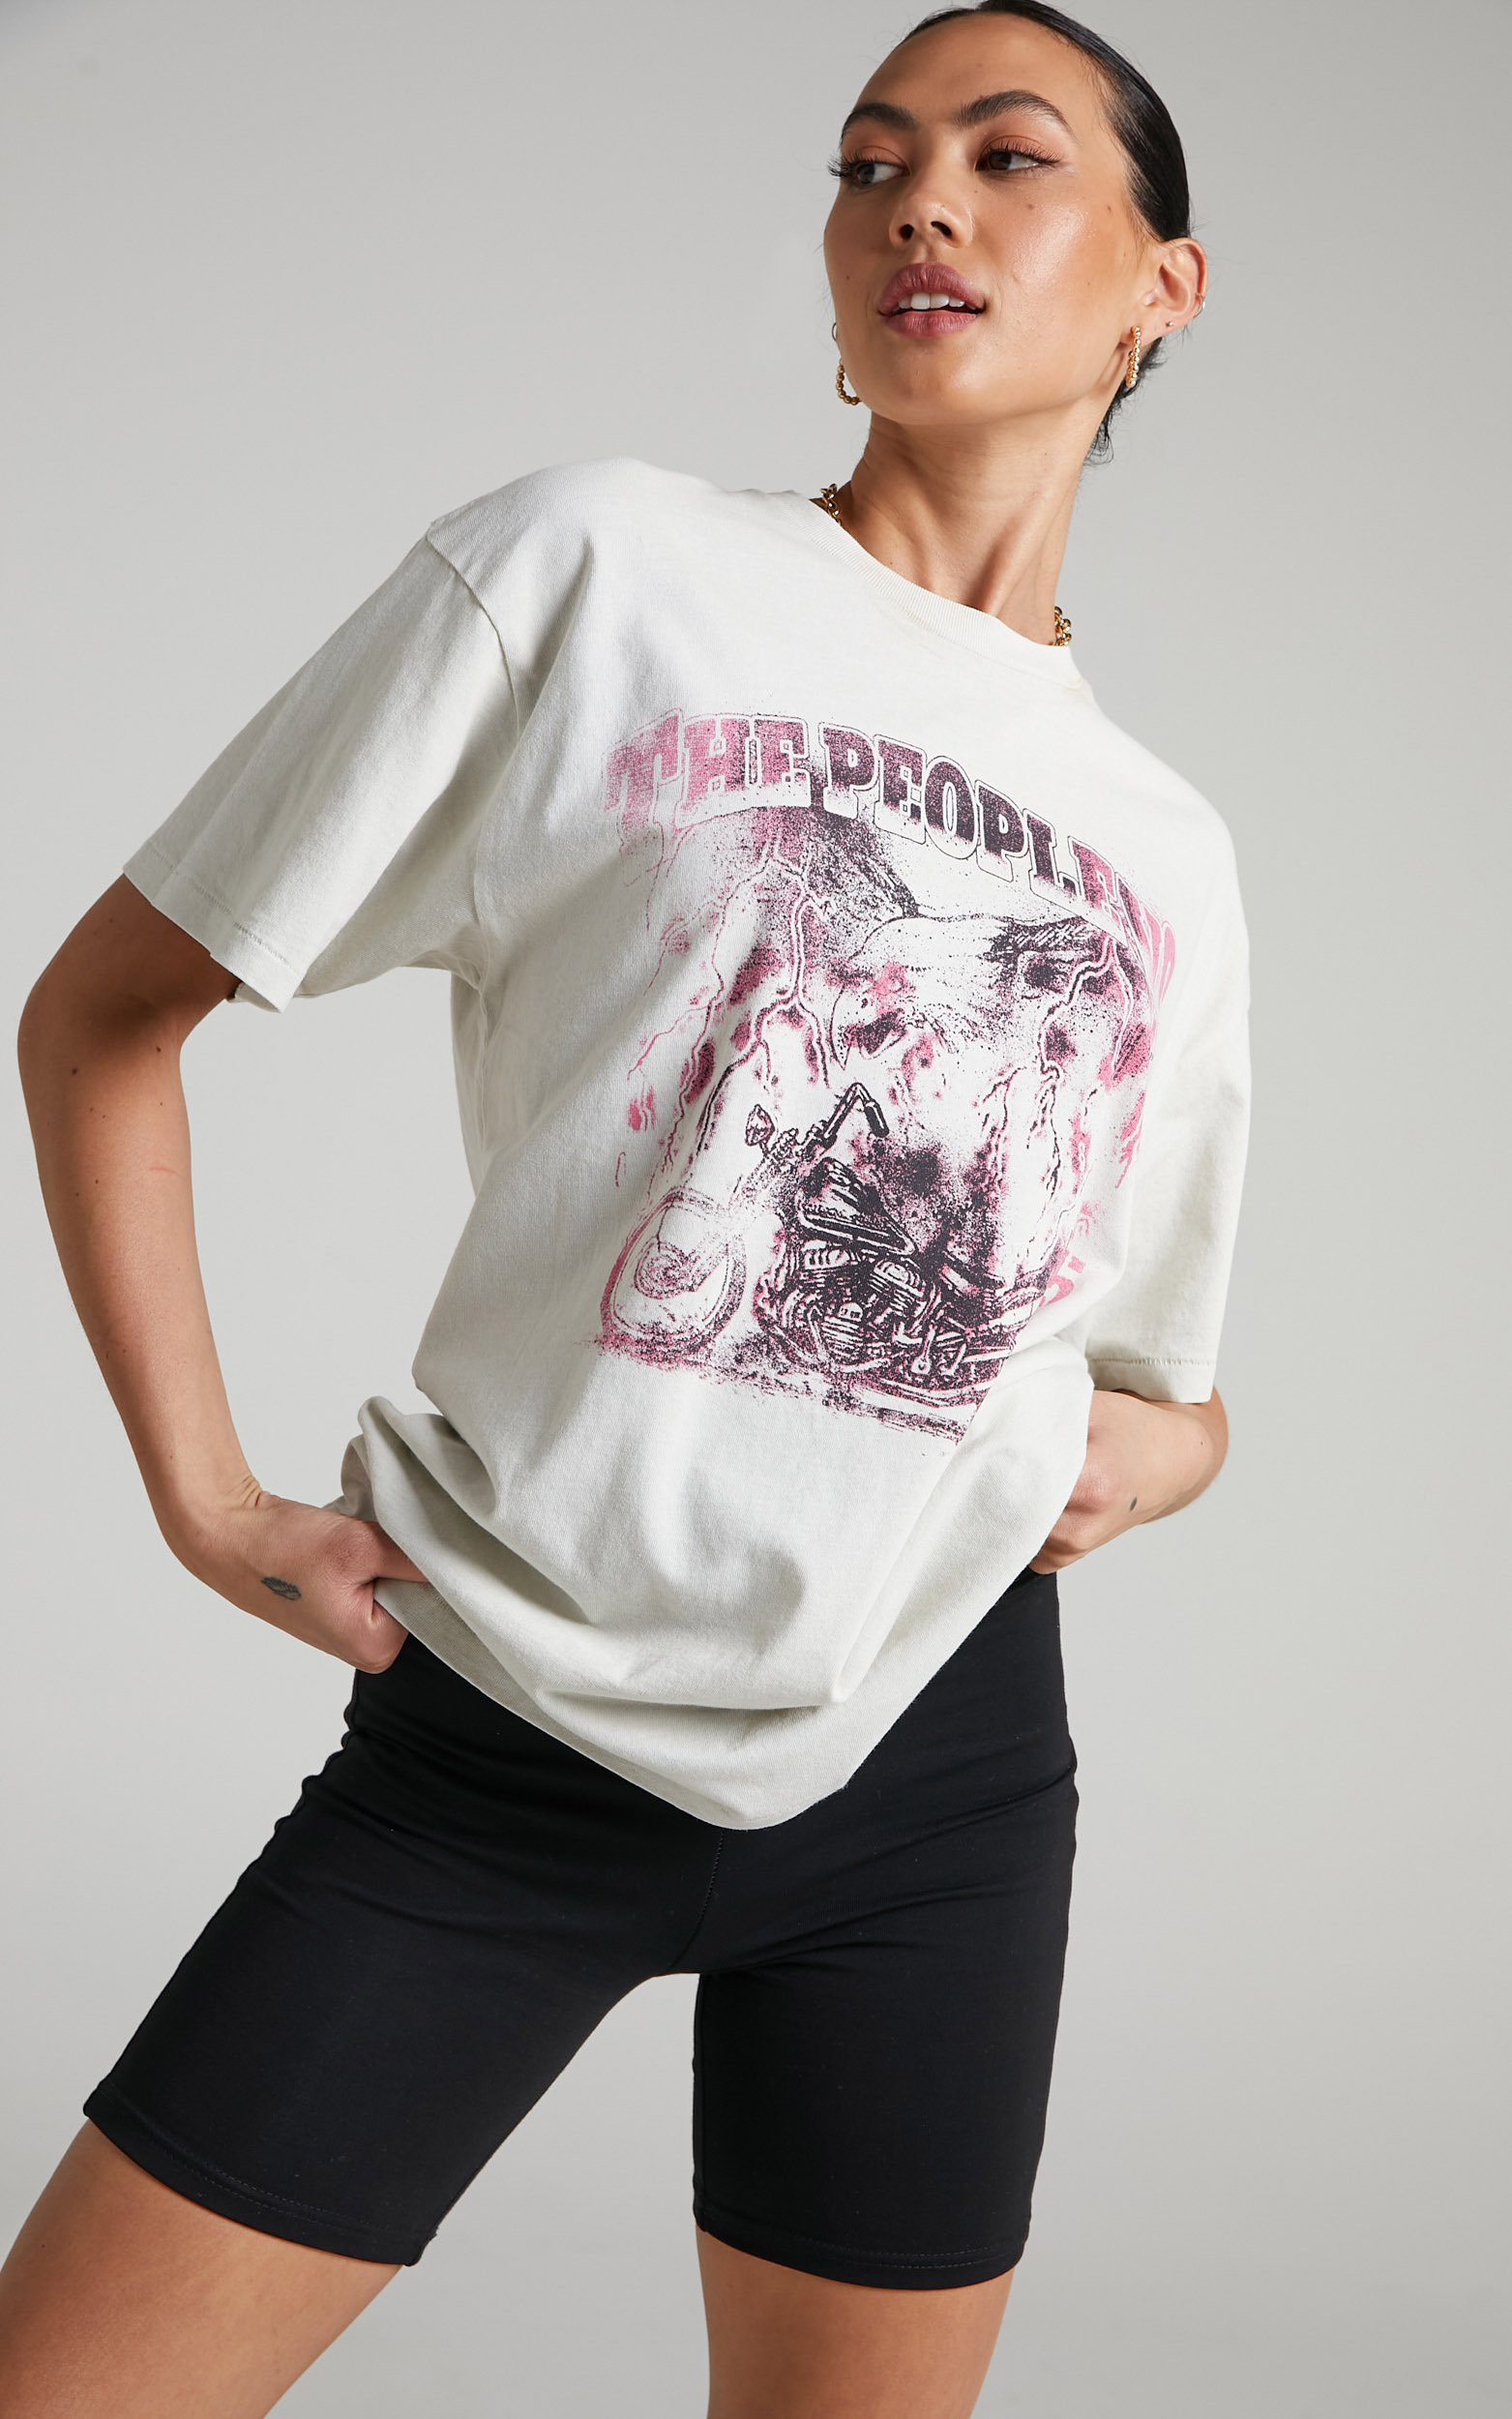 The People Vs - Ombre Eagle Boyfriend Tee in Antique White - XS, WHT1, hi-res image number null